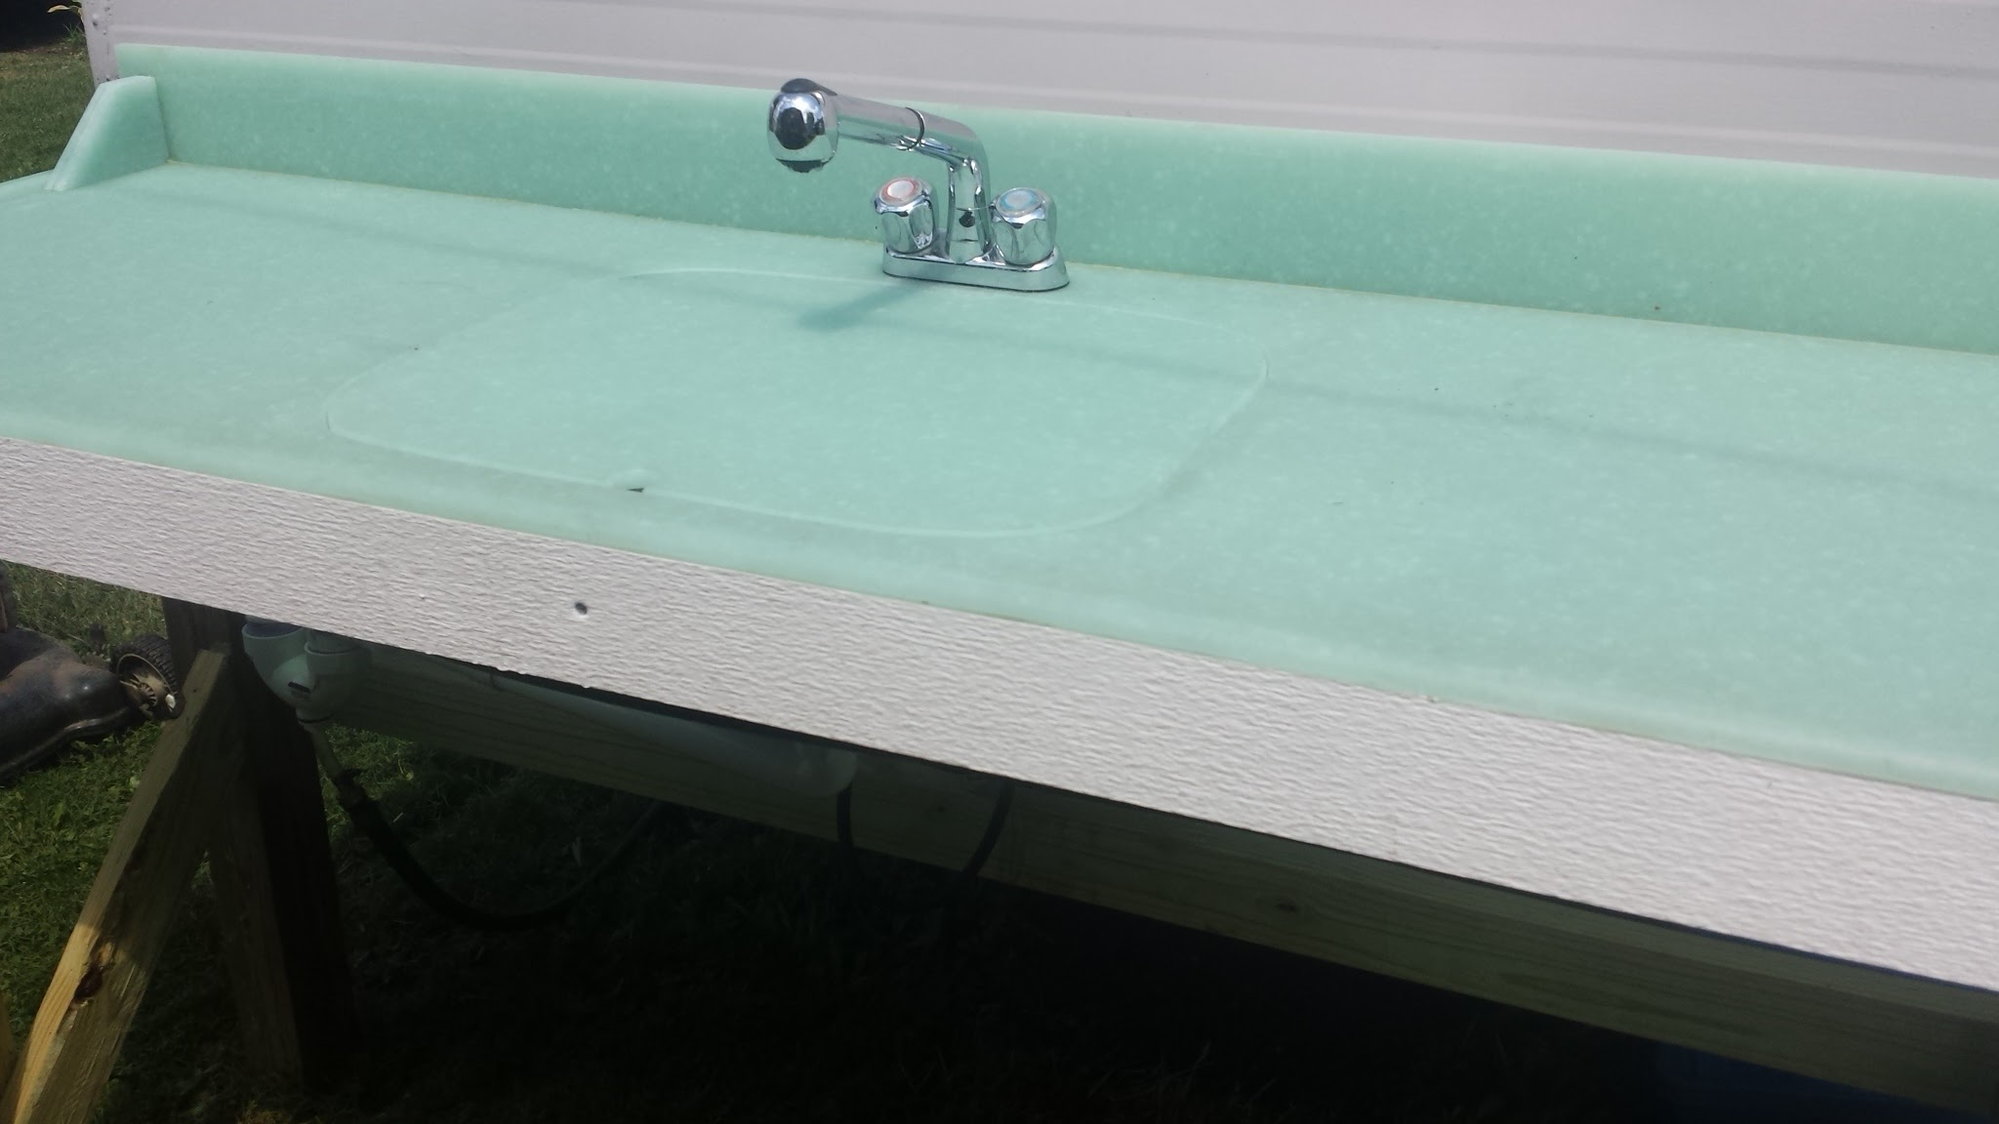 Fish cleaning table for dock - The Hull Truth - Boating and Fishing Forum